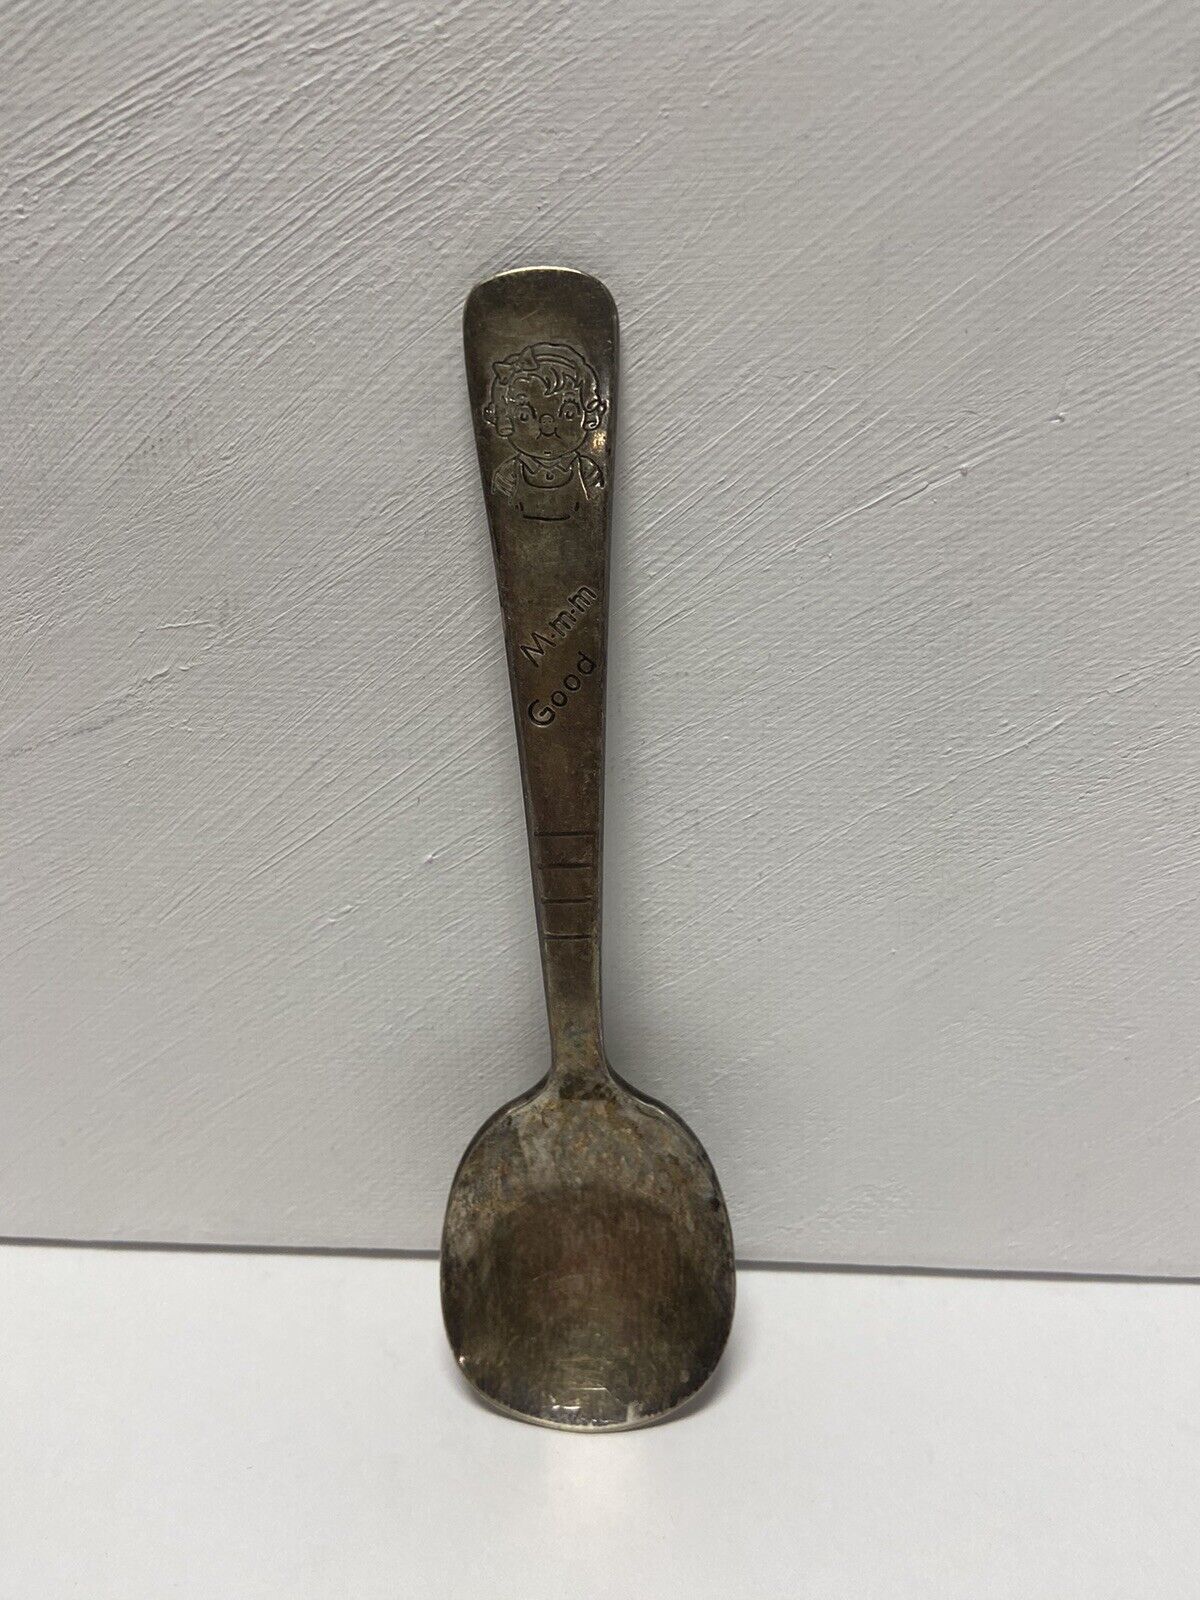 CAMPBELL'S SOUP VINTAGE CAMPBELL KID MMM GOOD SOUP SPOON WM. ROGERS ONEIDA